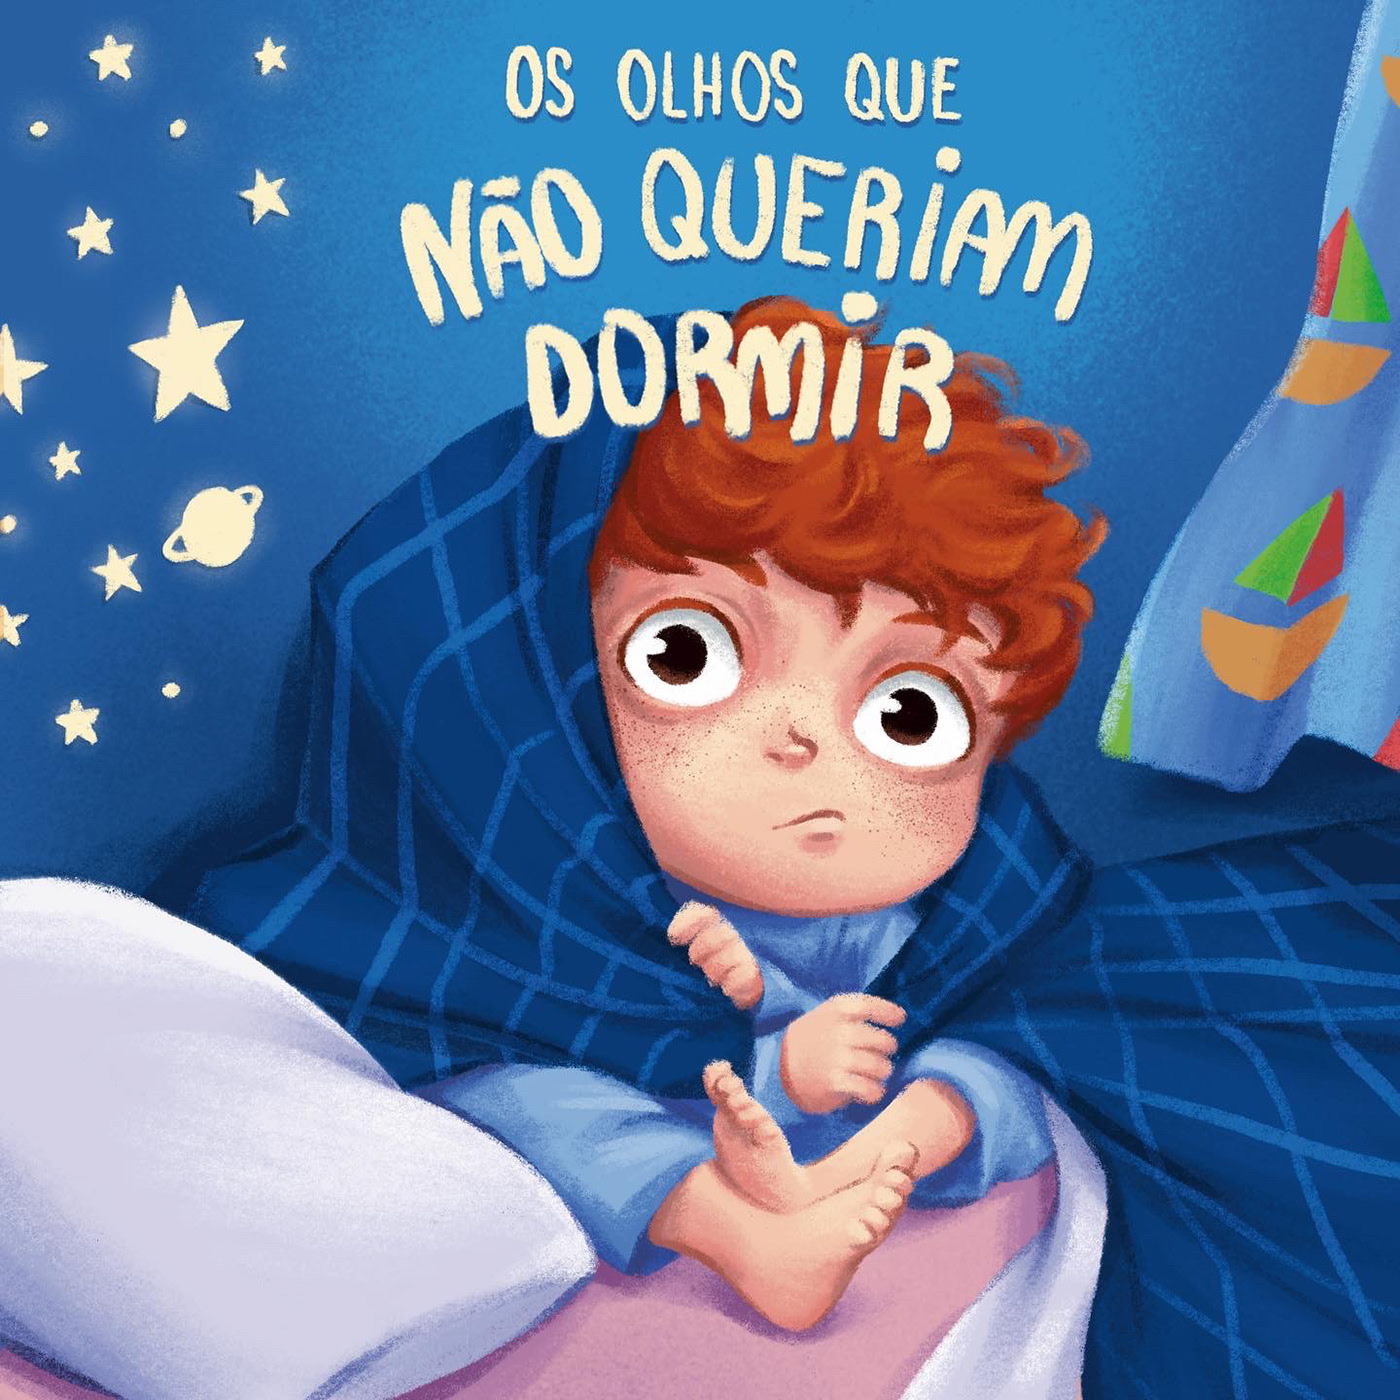 Sketch of my version of the book cover, with a red-haired child with eyes wide open, wrapped in a blanket, and colored boats on the curtain at the right side in a bedroom with blue wall and pink bed